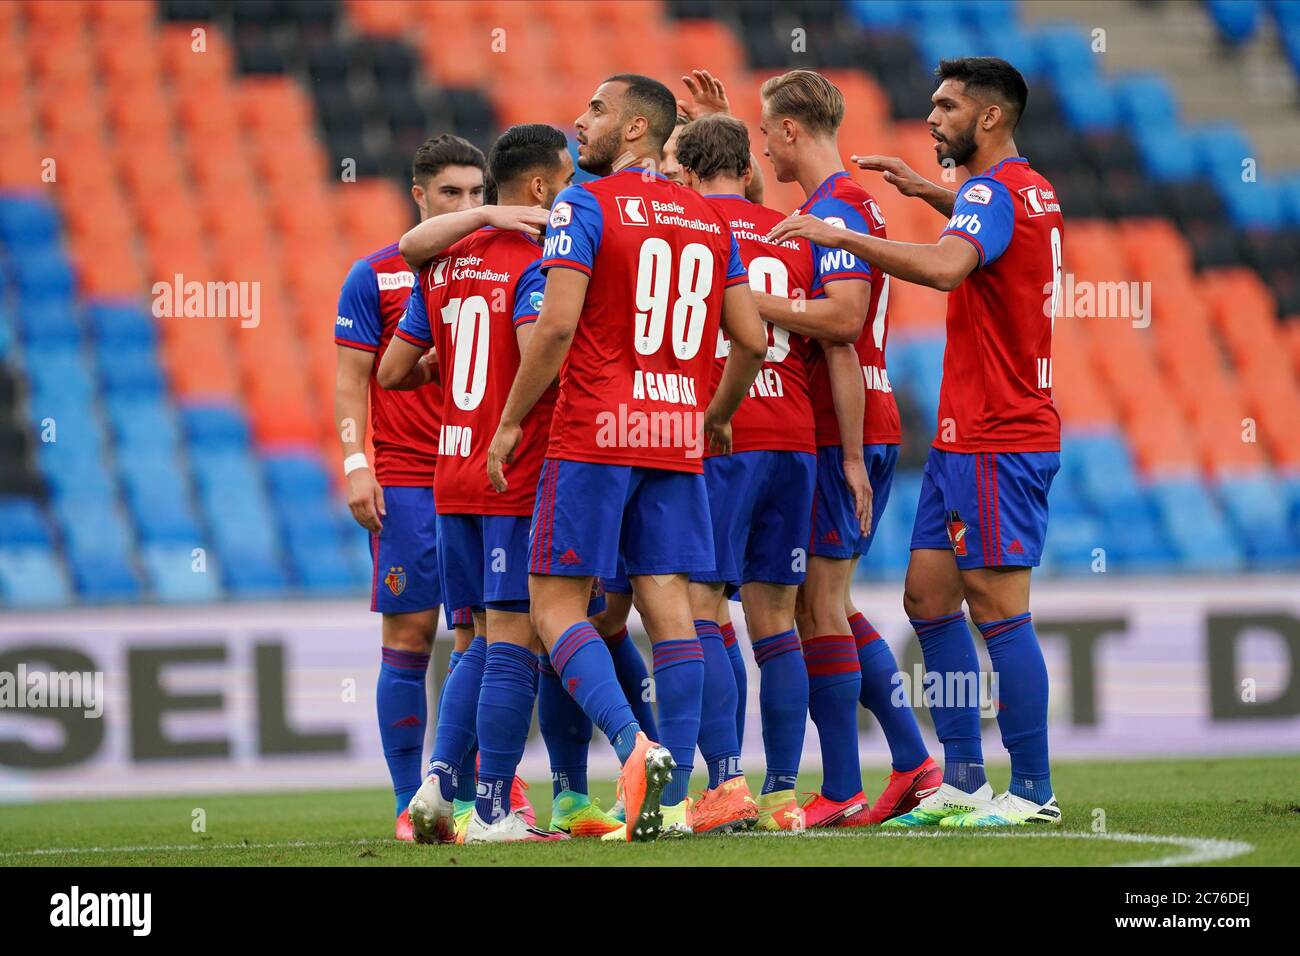 Players of FC Basel celebrate Fabian Frei's goal during the Super League  football match between FC Basel 1893 and FC Zuerich. Daniela Porcelli/SPP  Stock Photo - Alamy